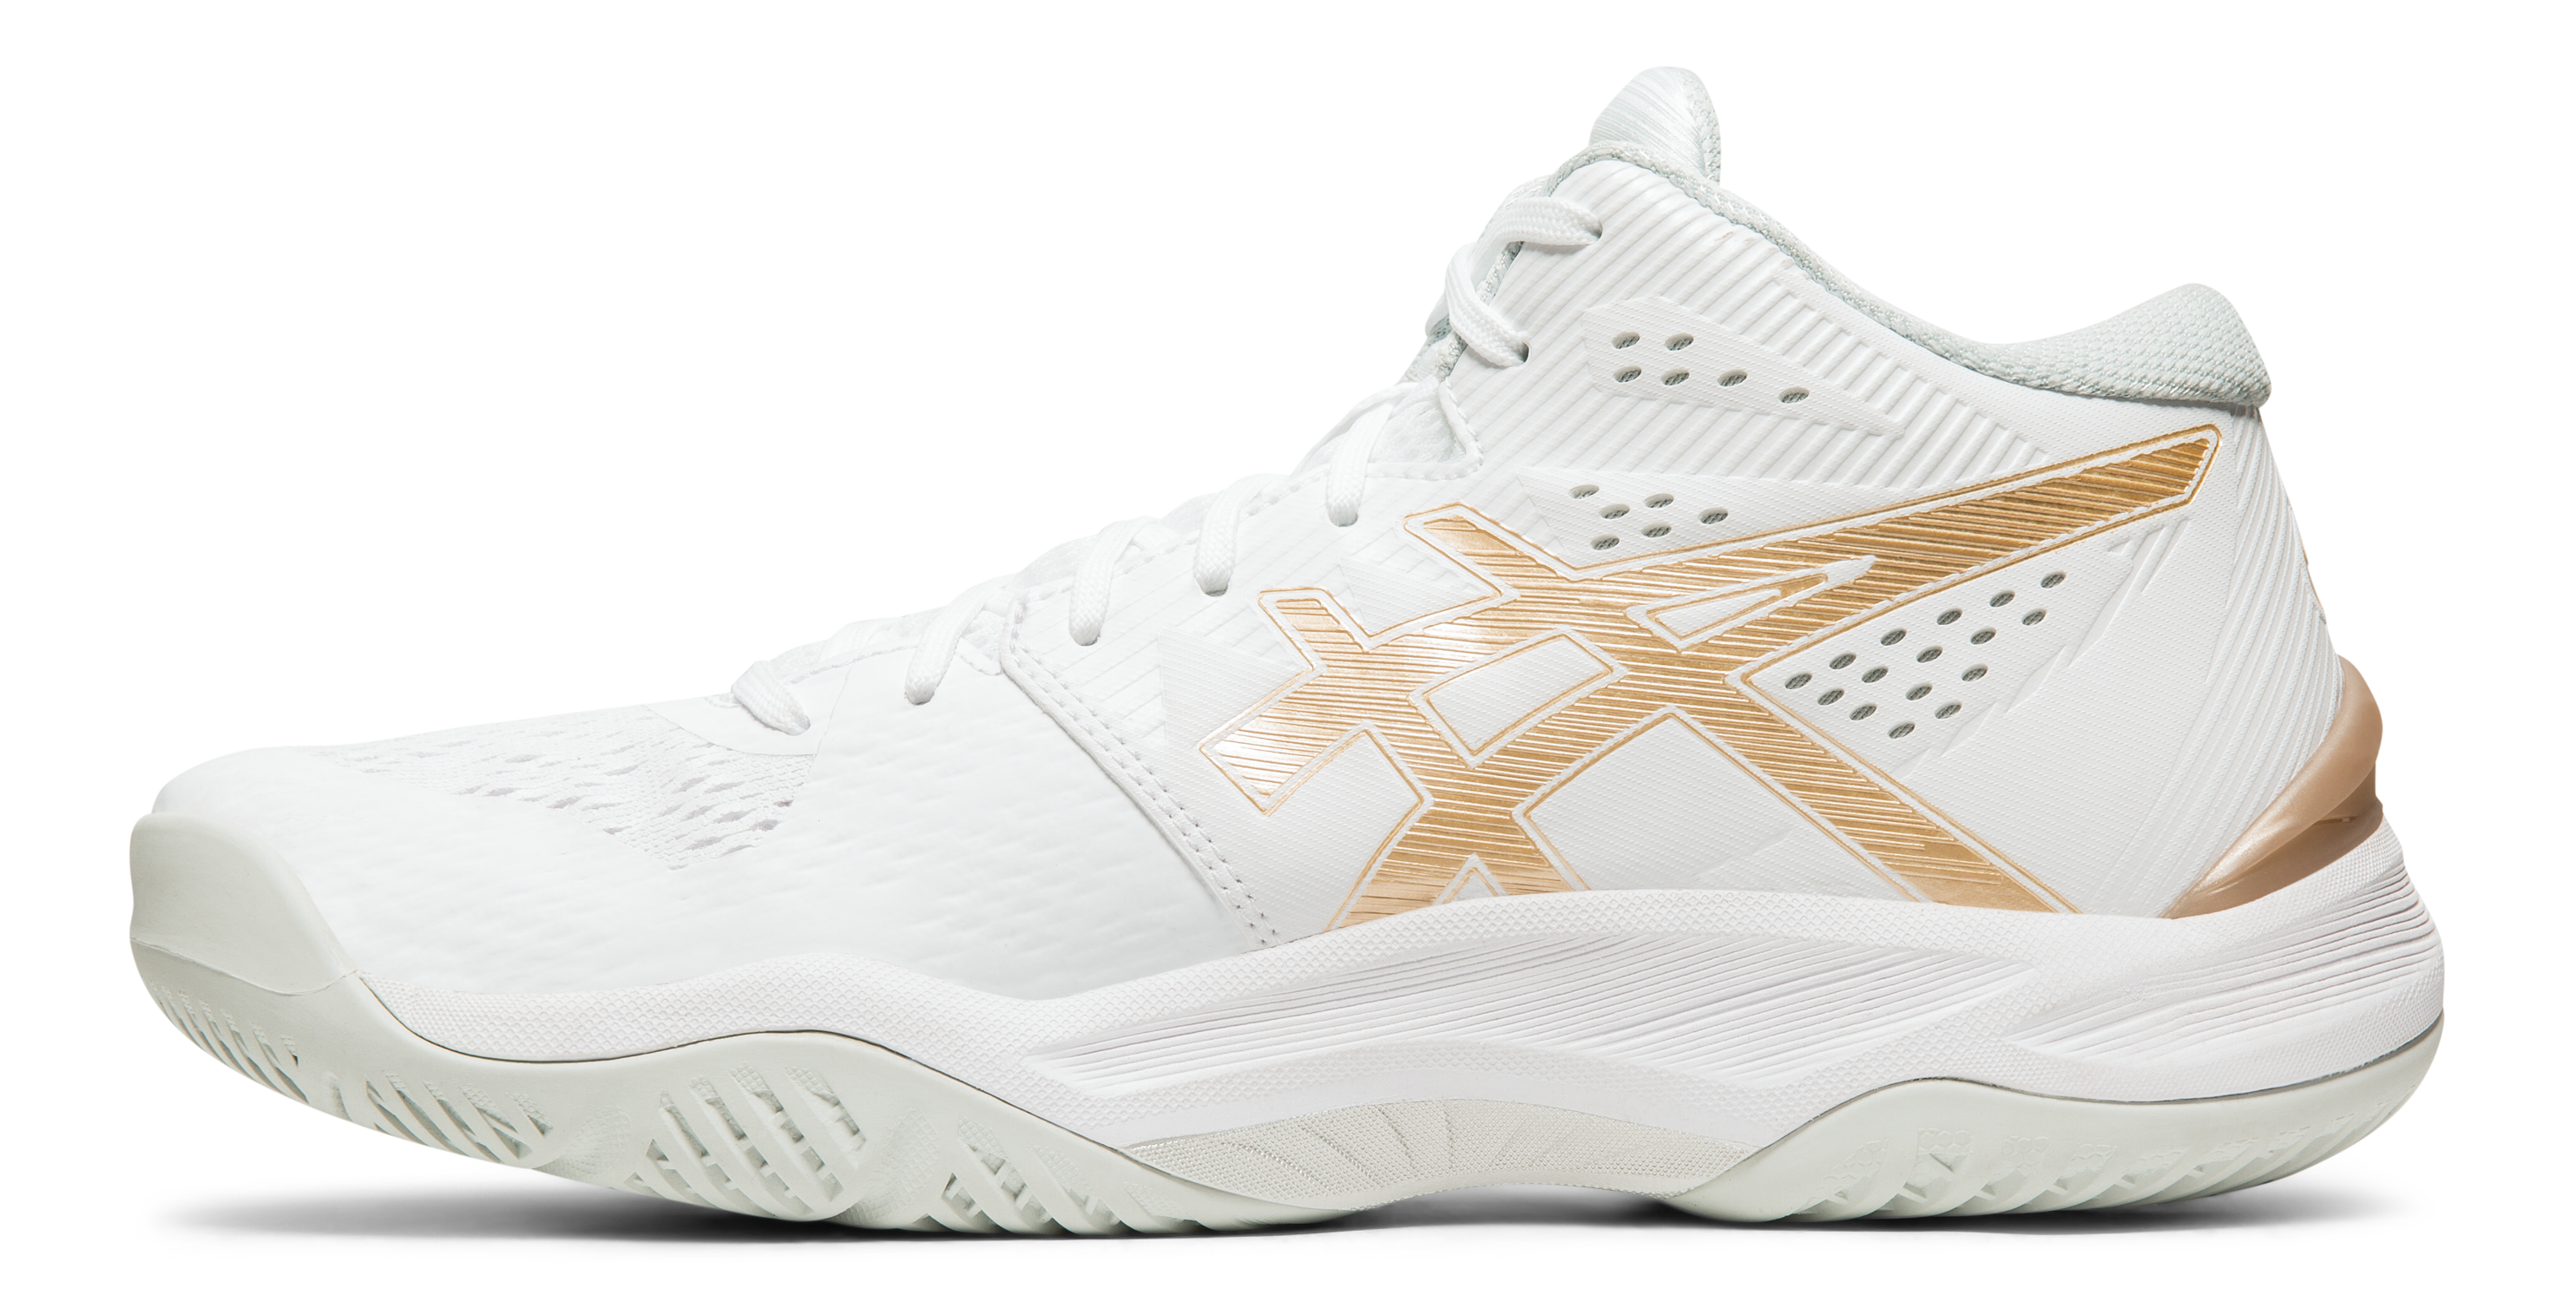 asics high top volleyball shoes